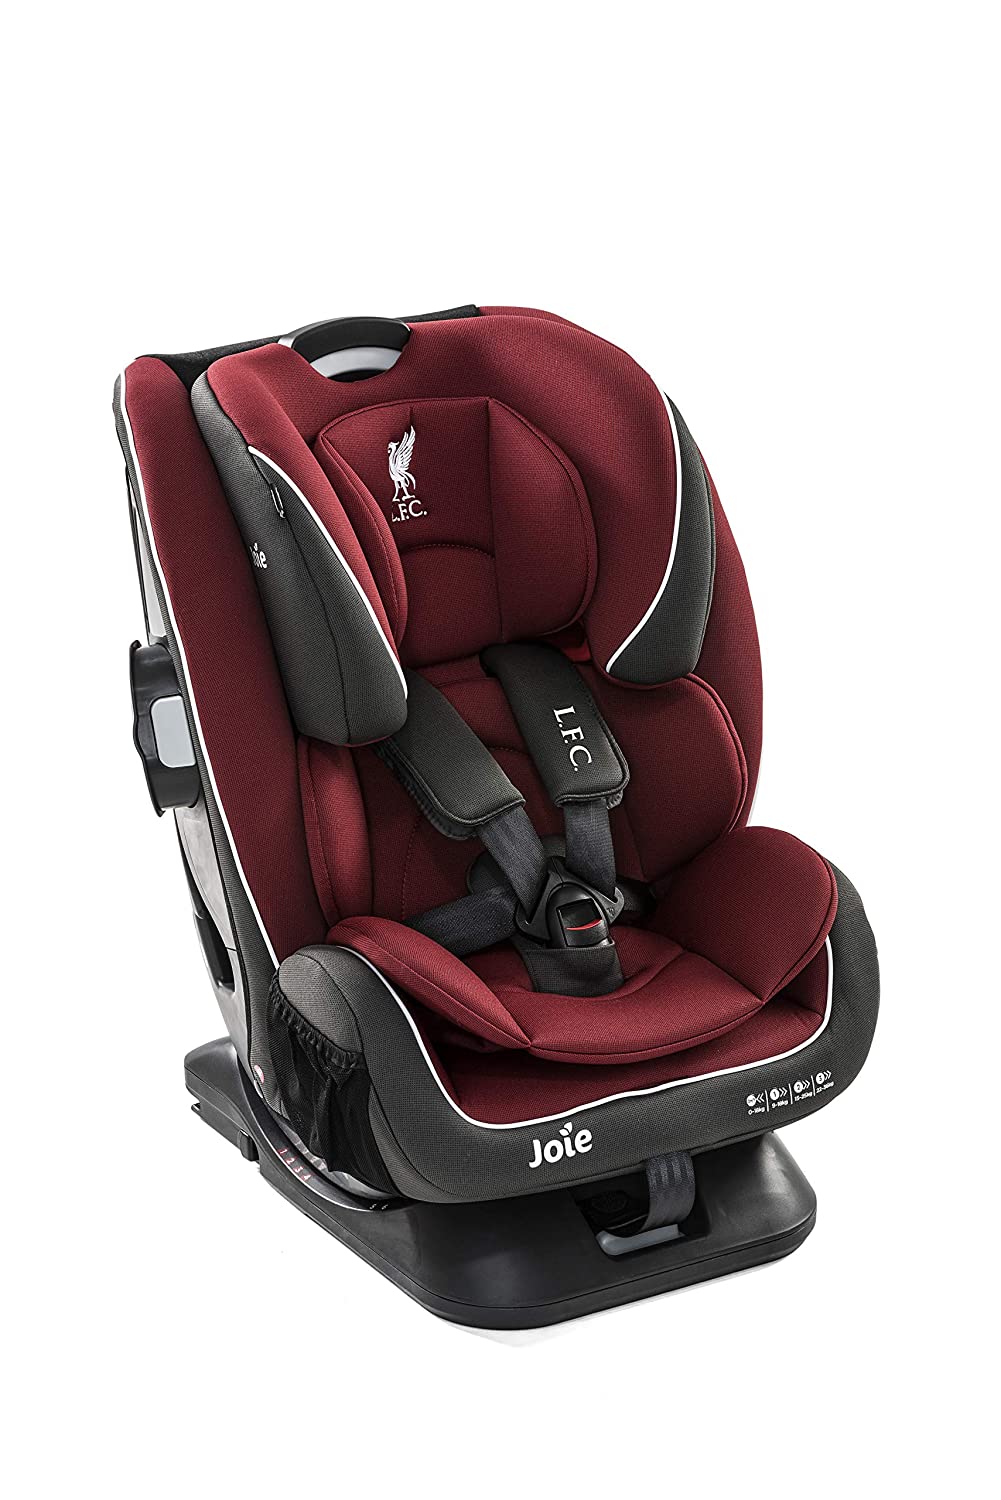 Joie Every Stage FX Group 0+/1/2/3 (Newborn to approx. 12 years) LFC Car Seat, Red Liverbird